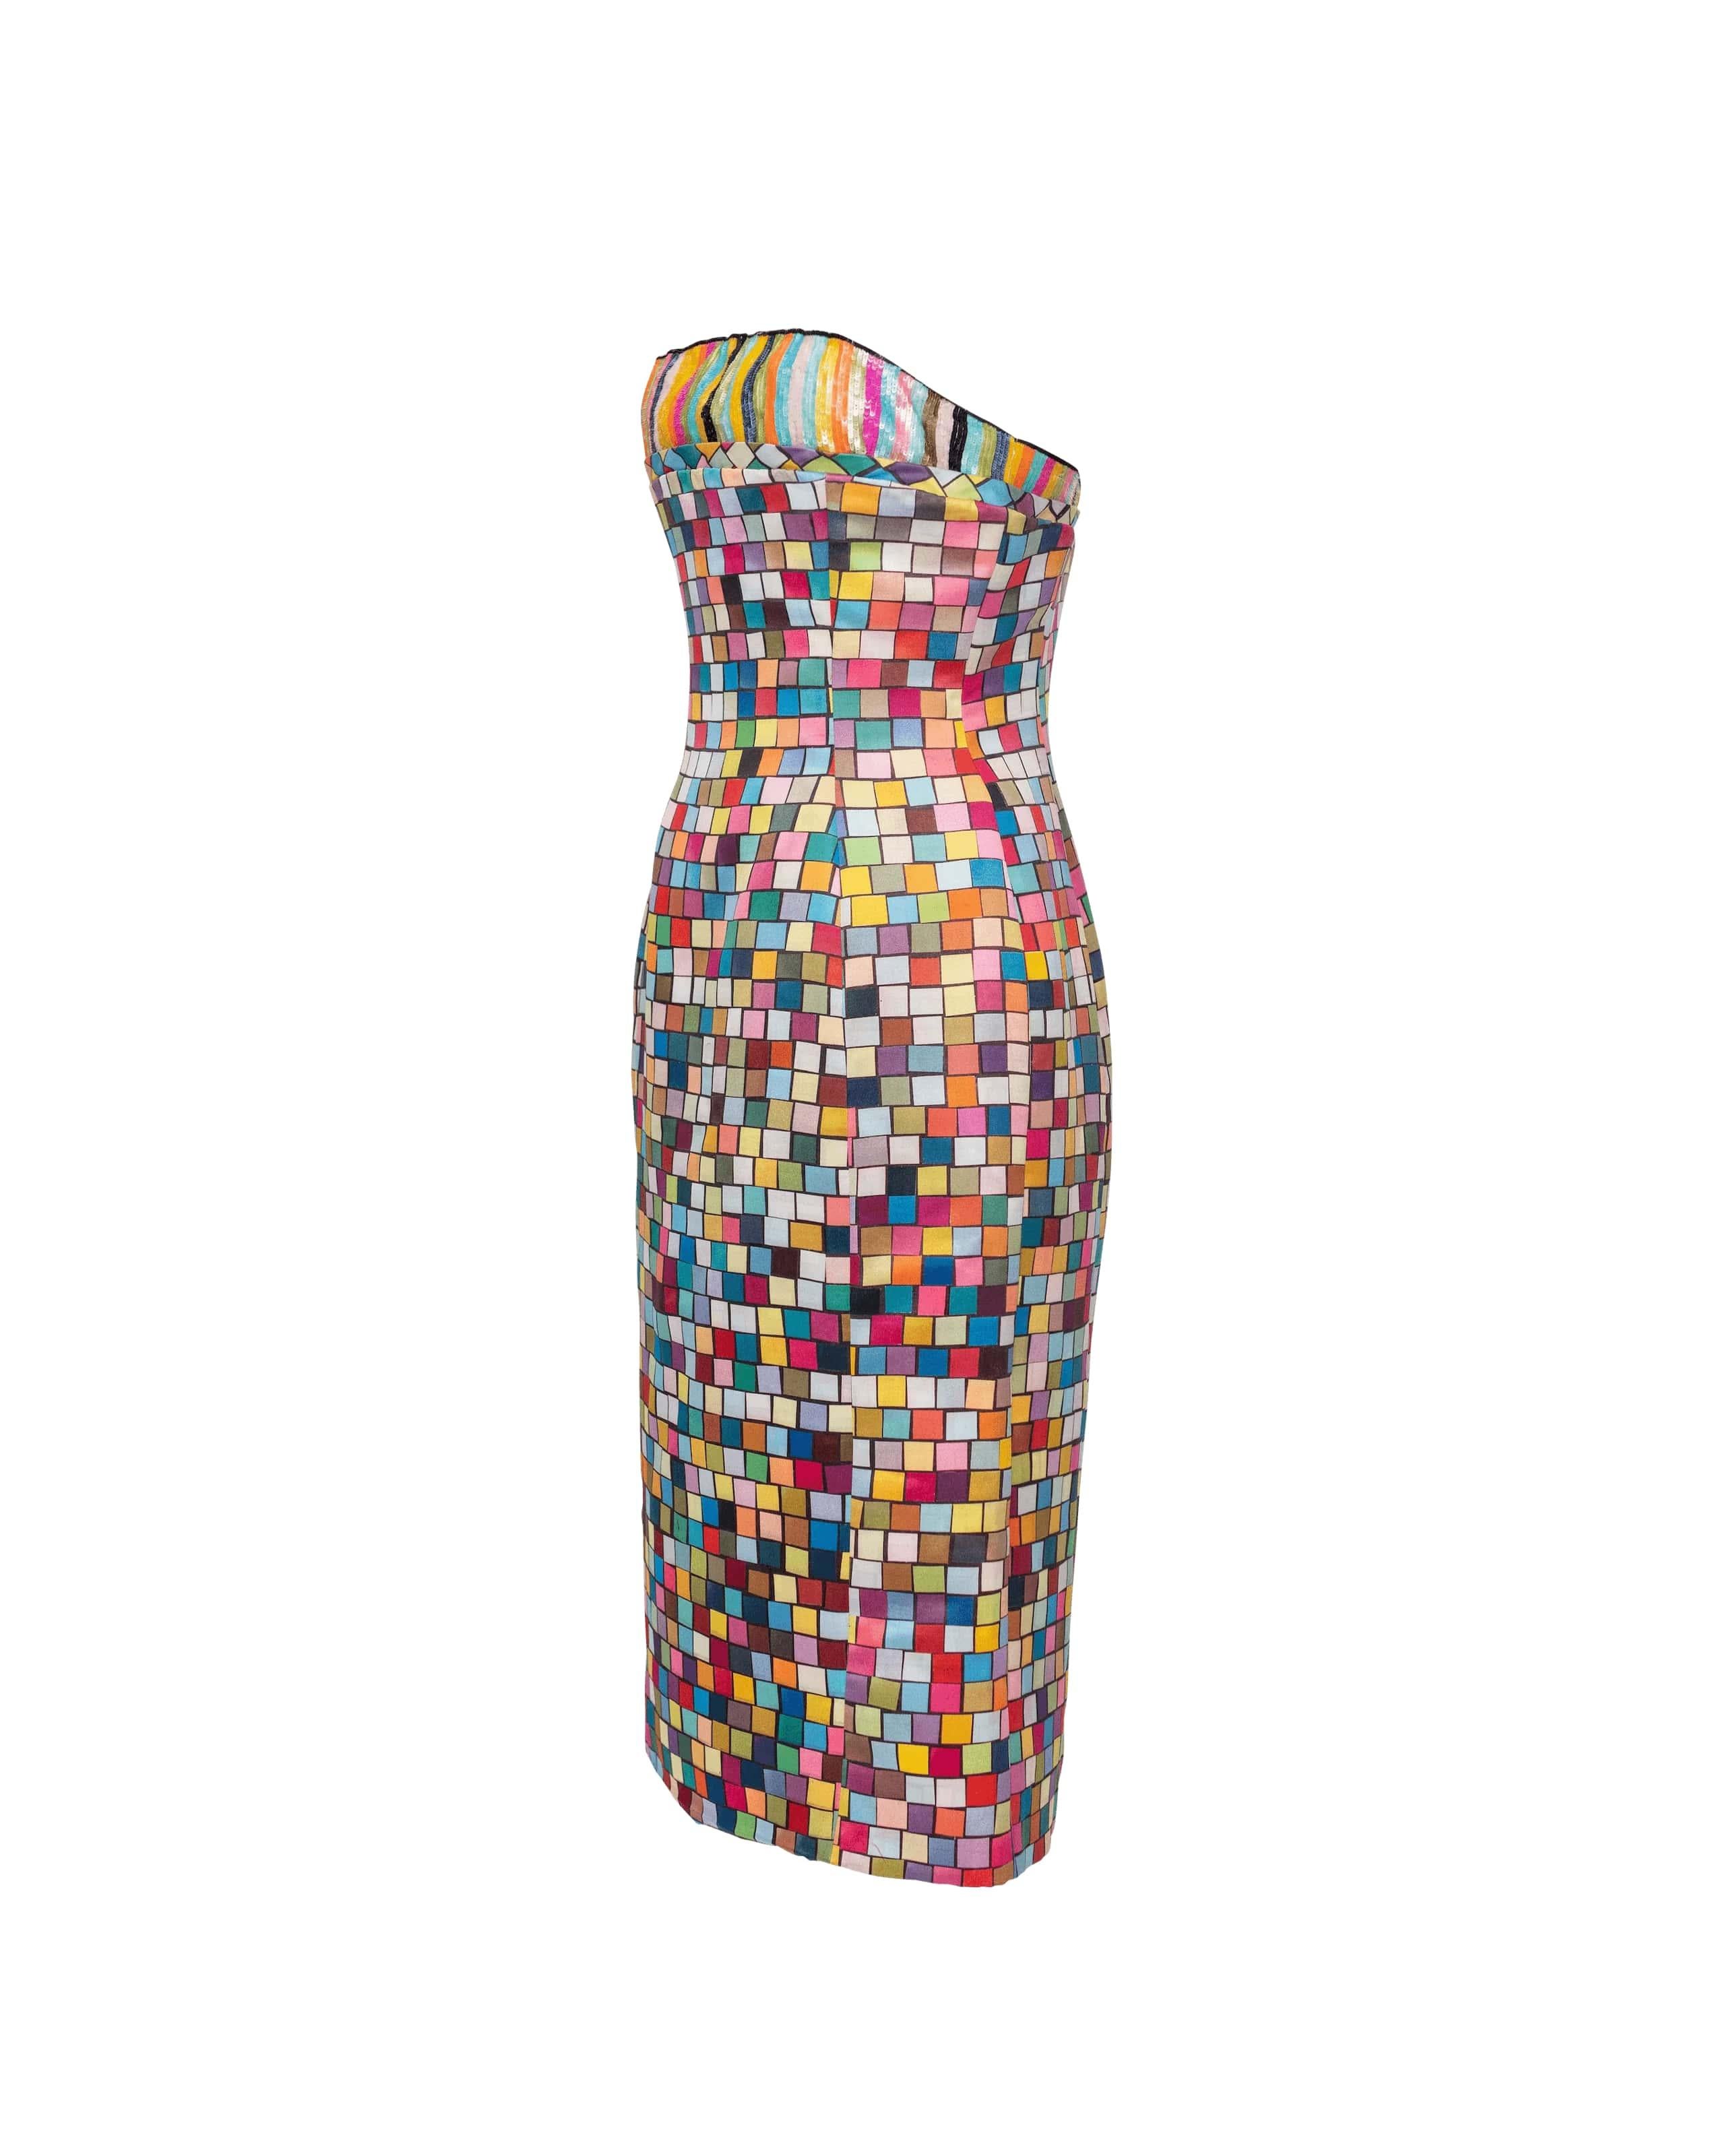 S/S 1996 Todd Oldham rainbow brick patterned midi dress. Sequin rainbow striped bust adds an extra playful element. As seen on the runway on supermodel Amber Valletta. 